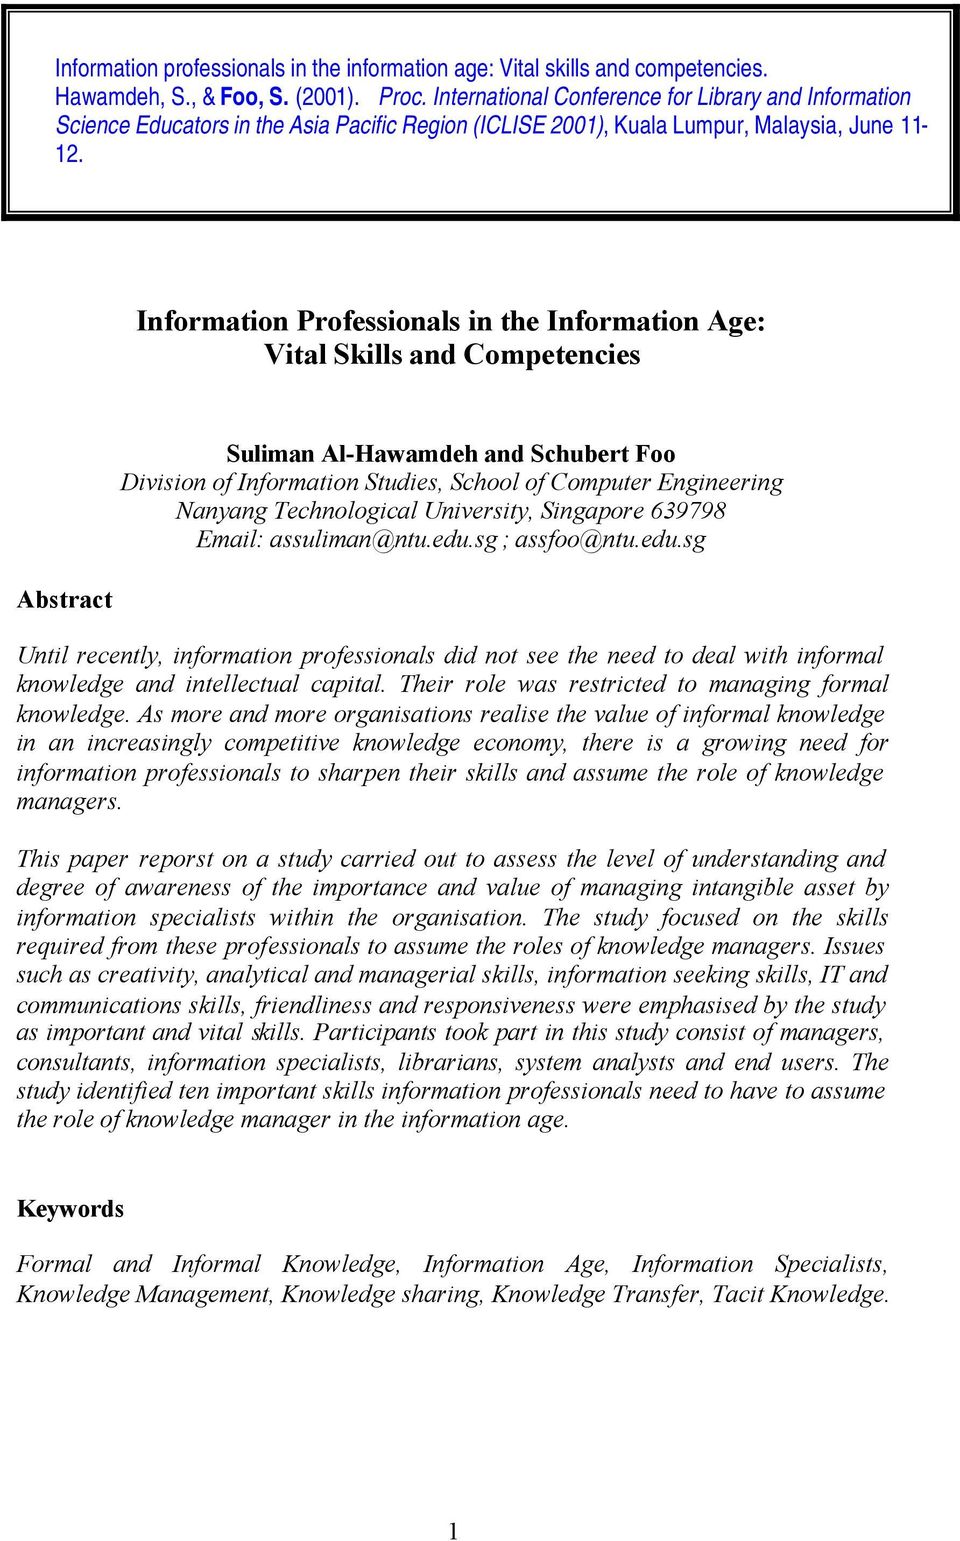 Information Professionals in the Information Age: Vital Skills and Competencies Abstract Suliman Al-Hawamdeh and Schubert Foo Division of Information Studies, School of Computer Engineering Nanyang